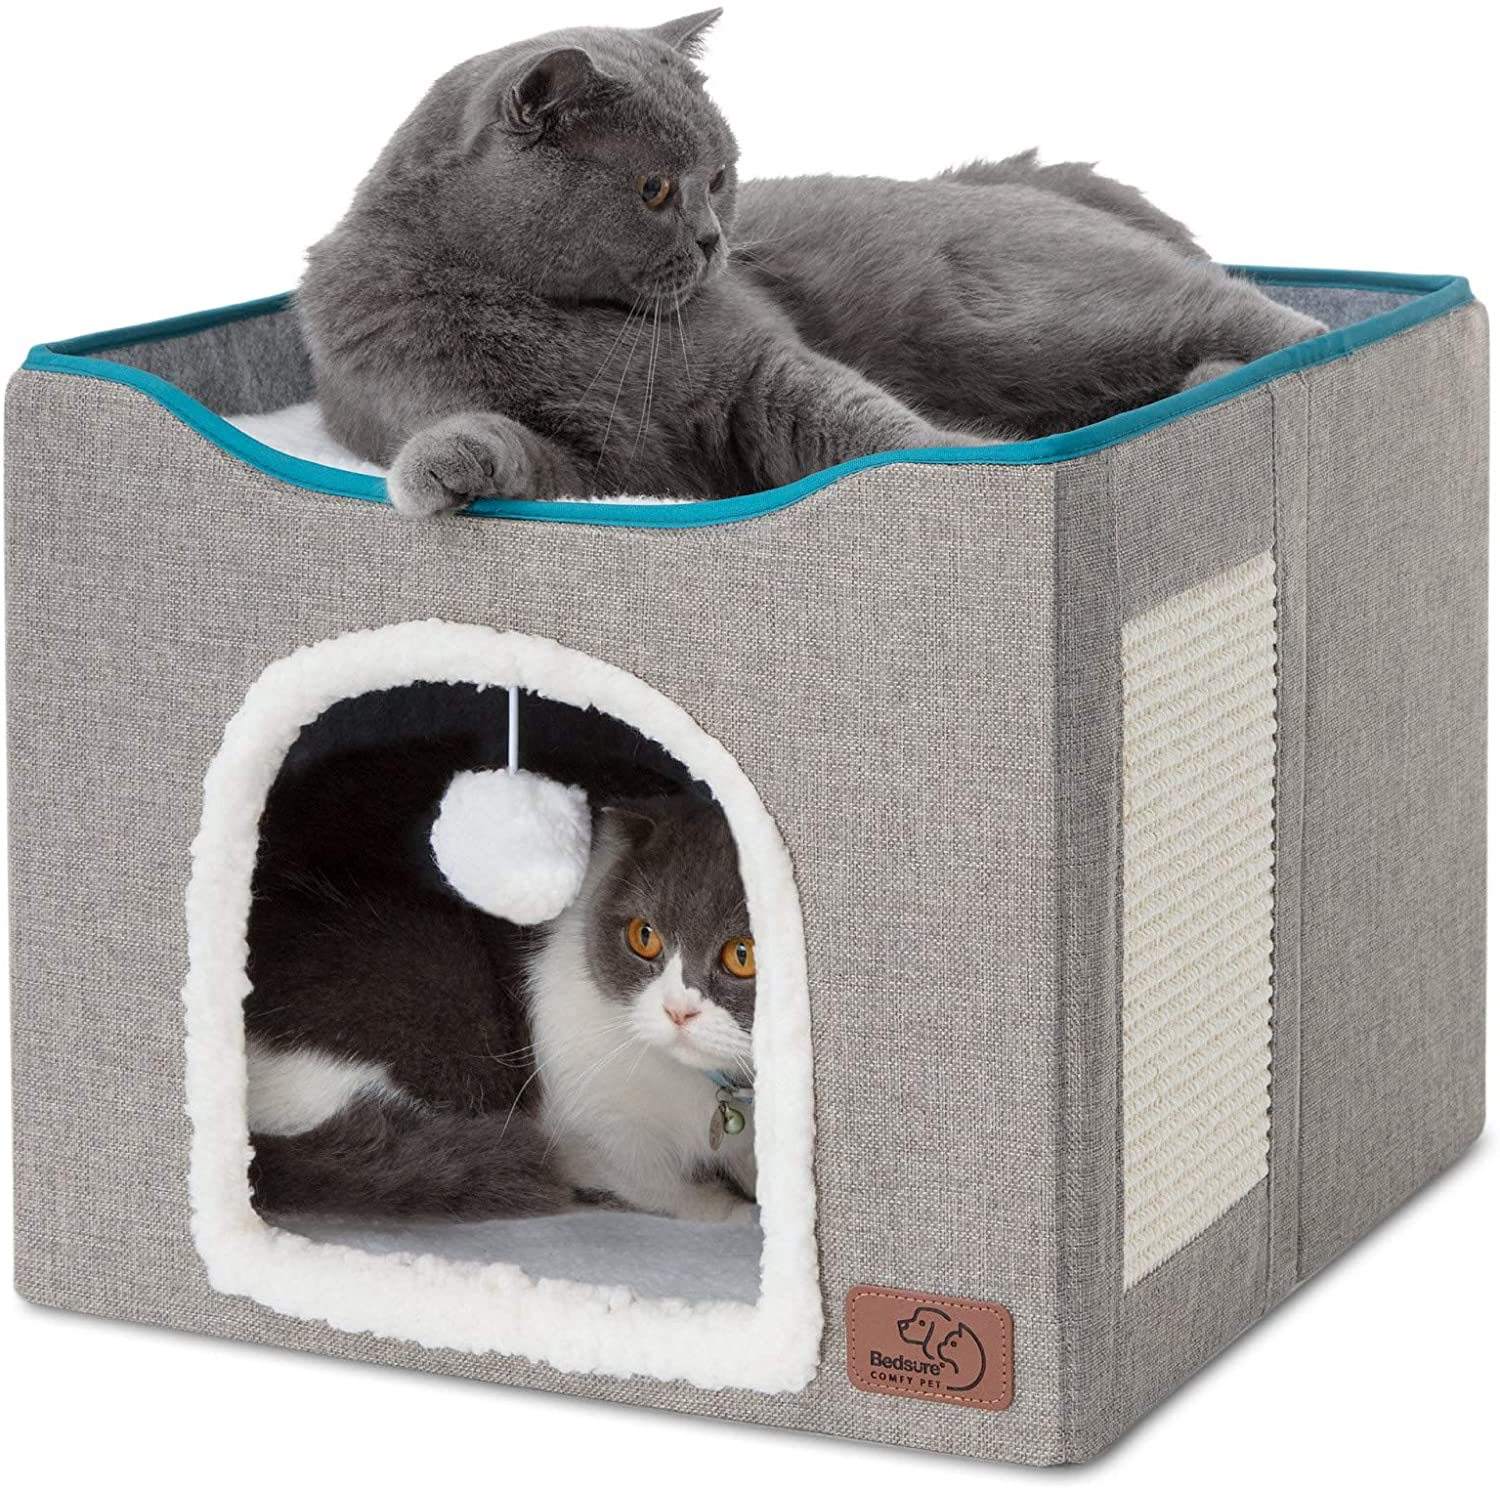 2 In 1 Cat Scratching Toys Foldable Cat House Warm Cat Bed